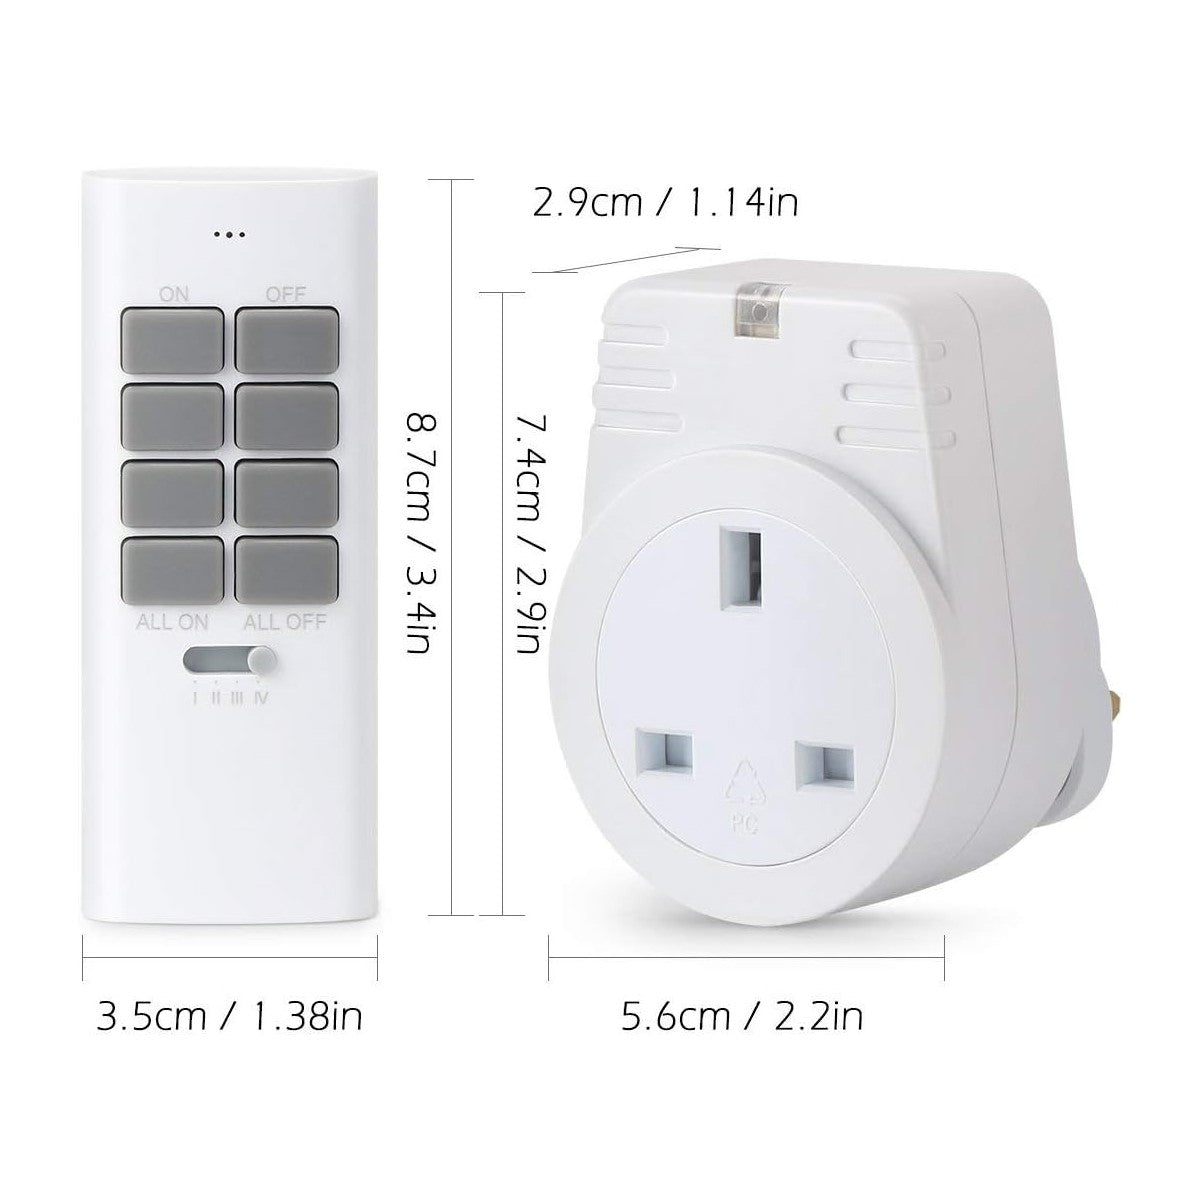 Maplin ORB RF Remote Controlled Mains Plug Socket with 1 Remote Version S2 - White - maplin.co.uk